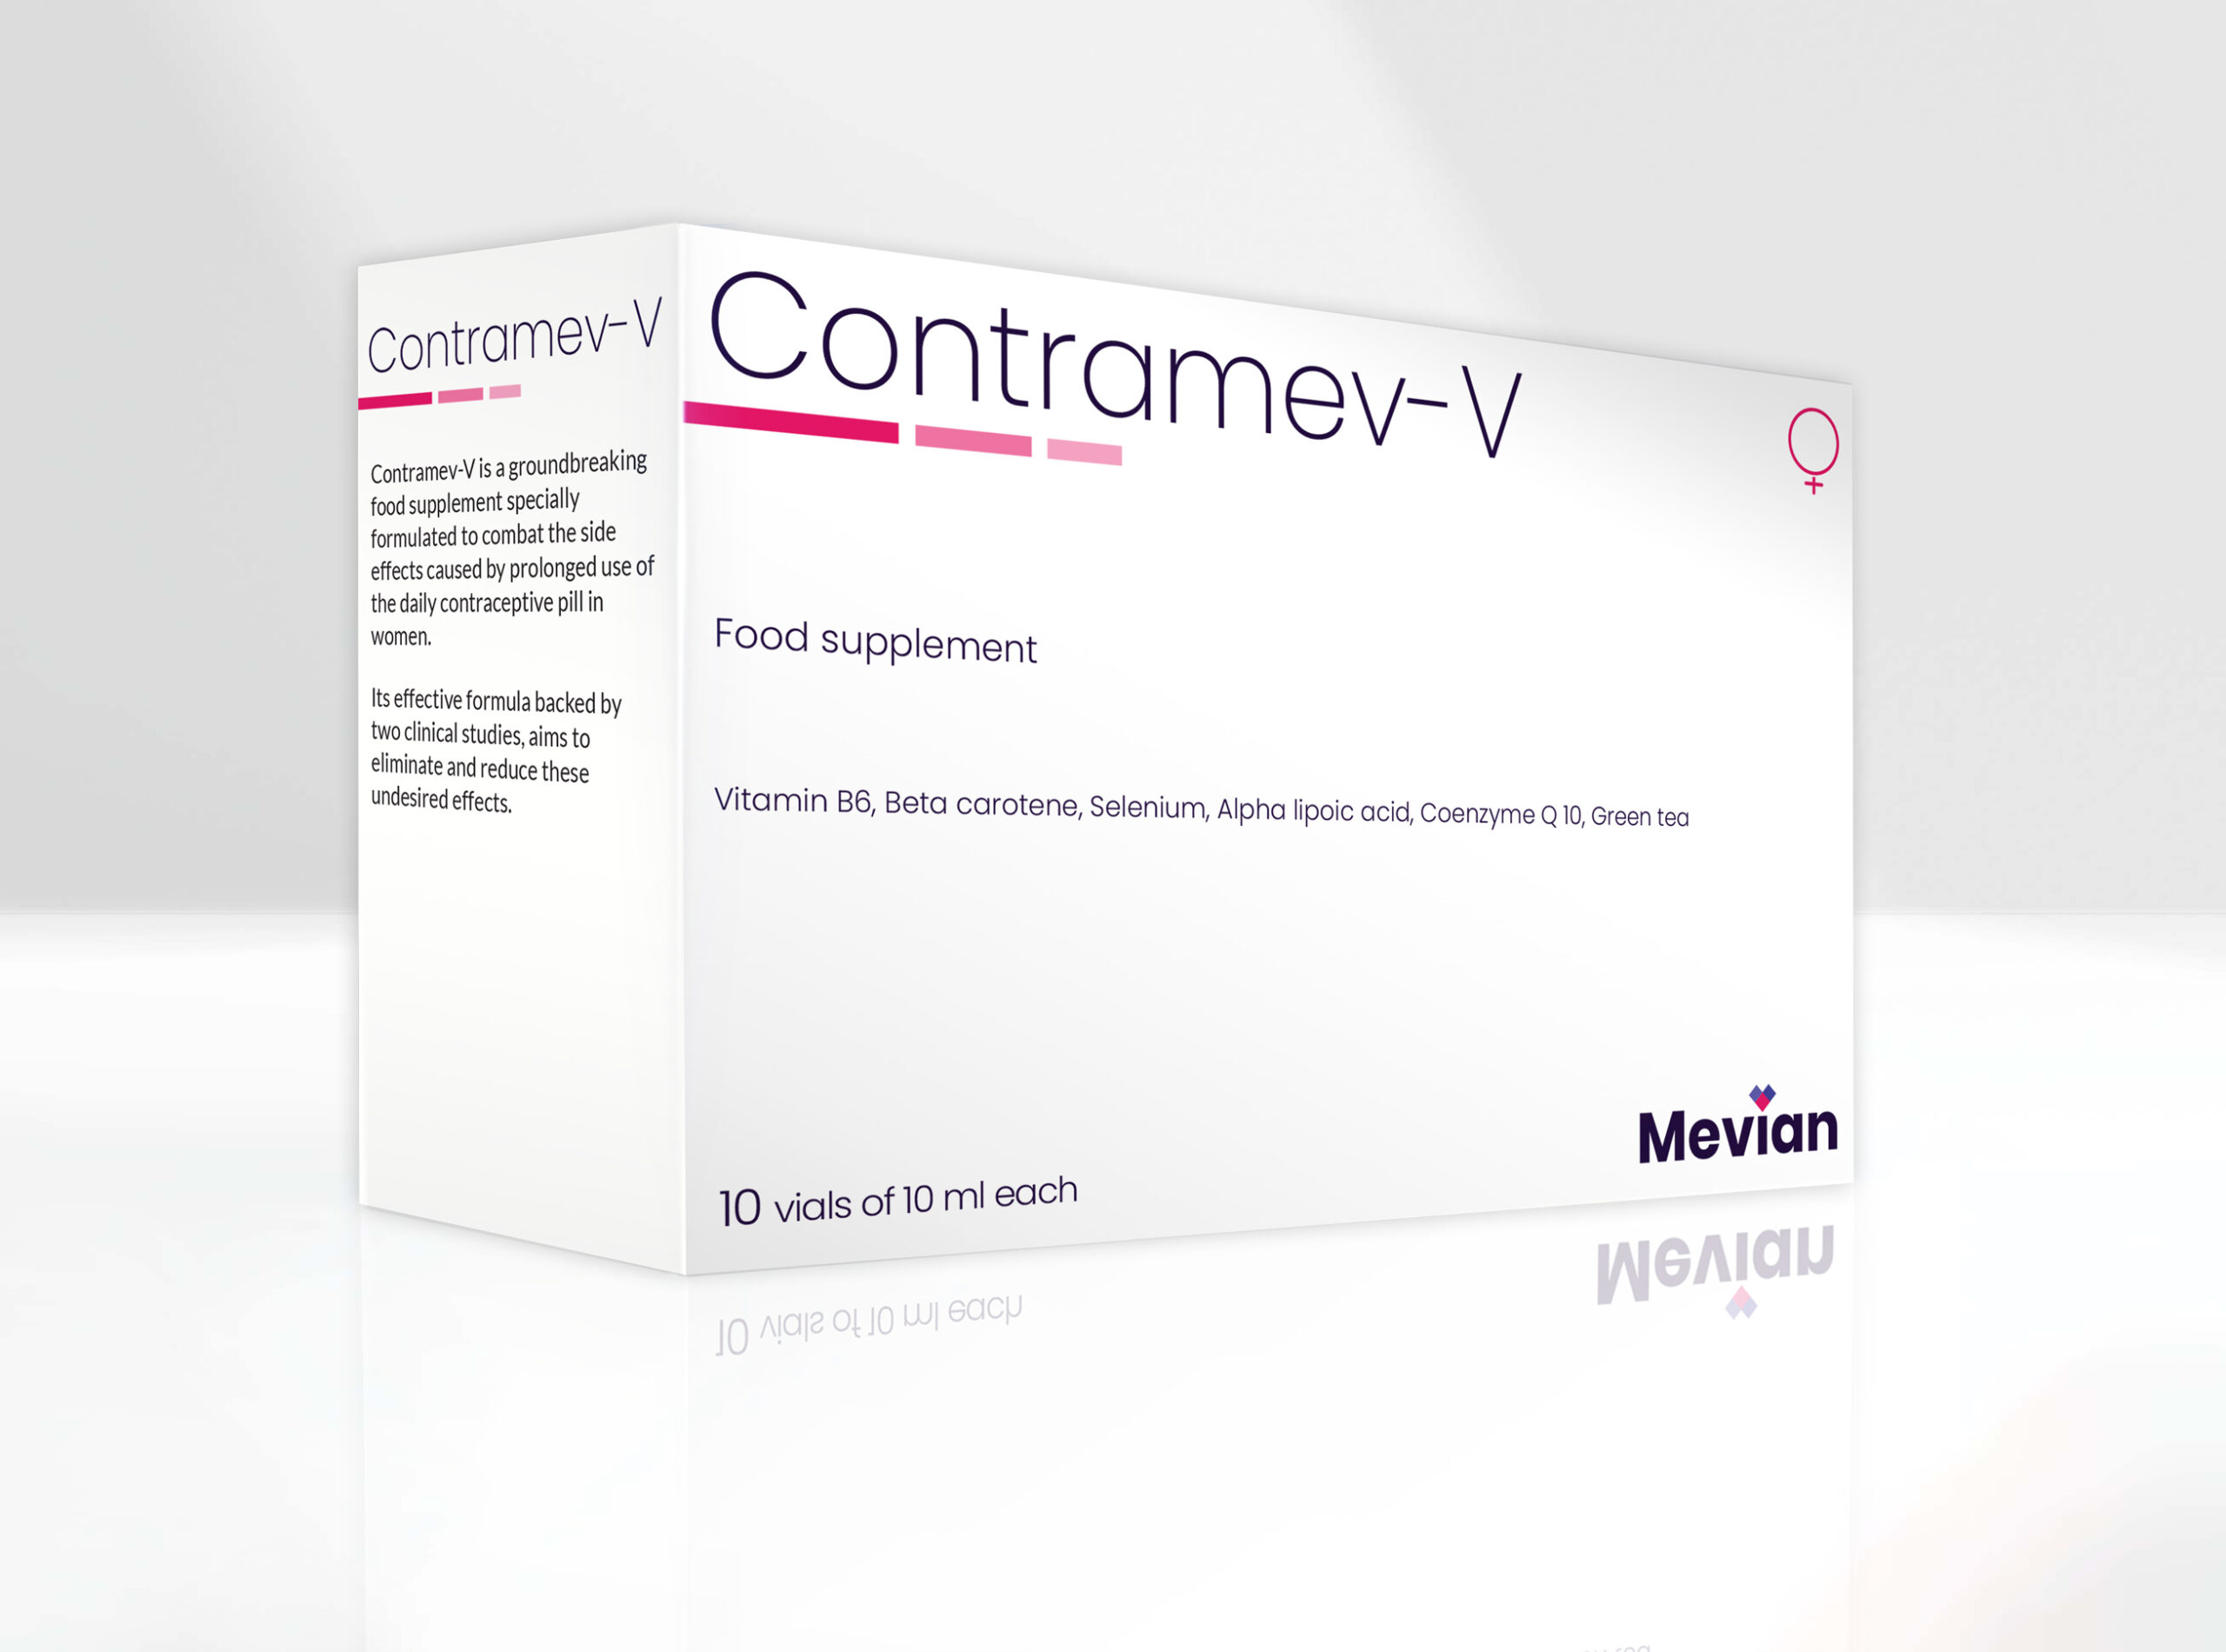 Contramev-V is specially formulated to combat the side effects caused by prolonged use of the daily contraceptive pill in women.